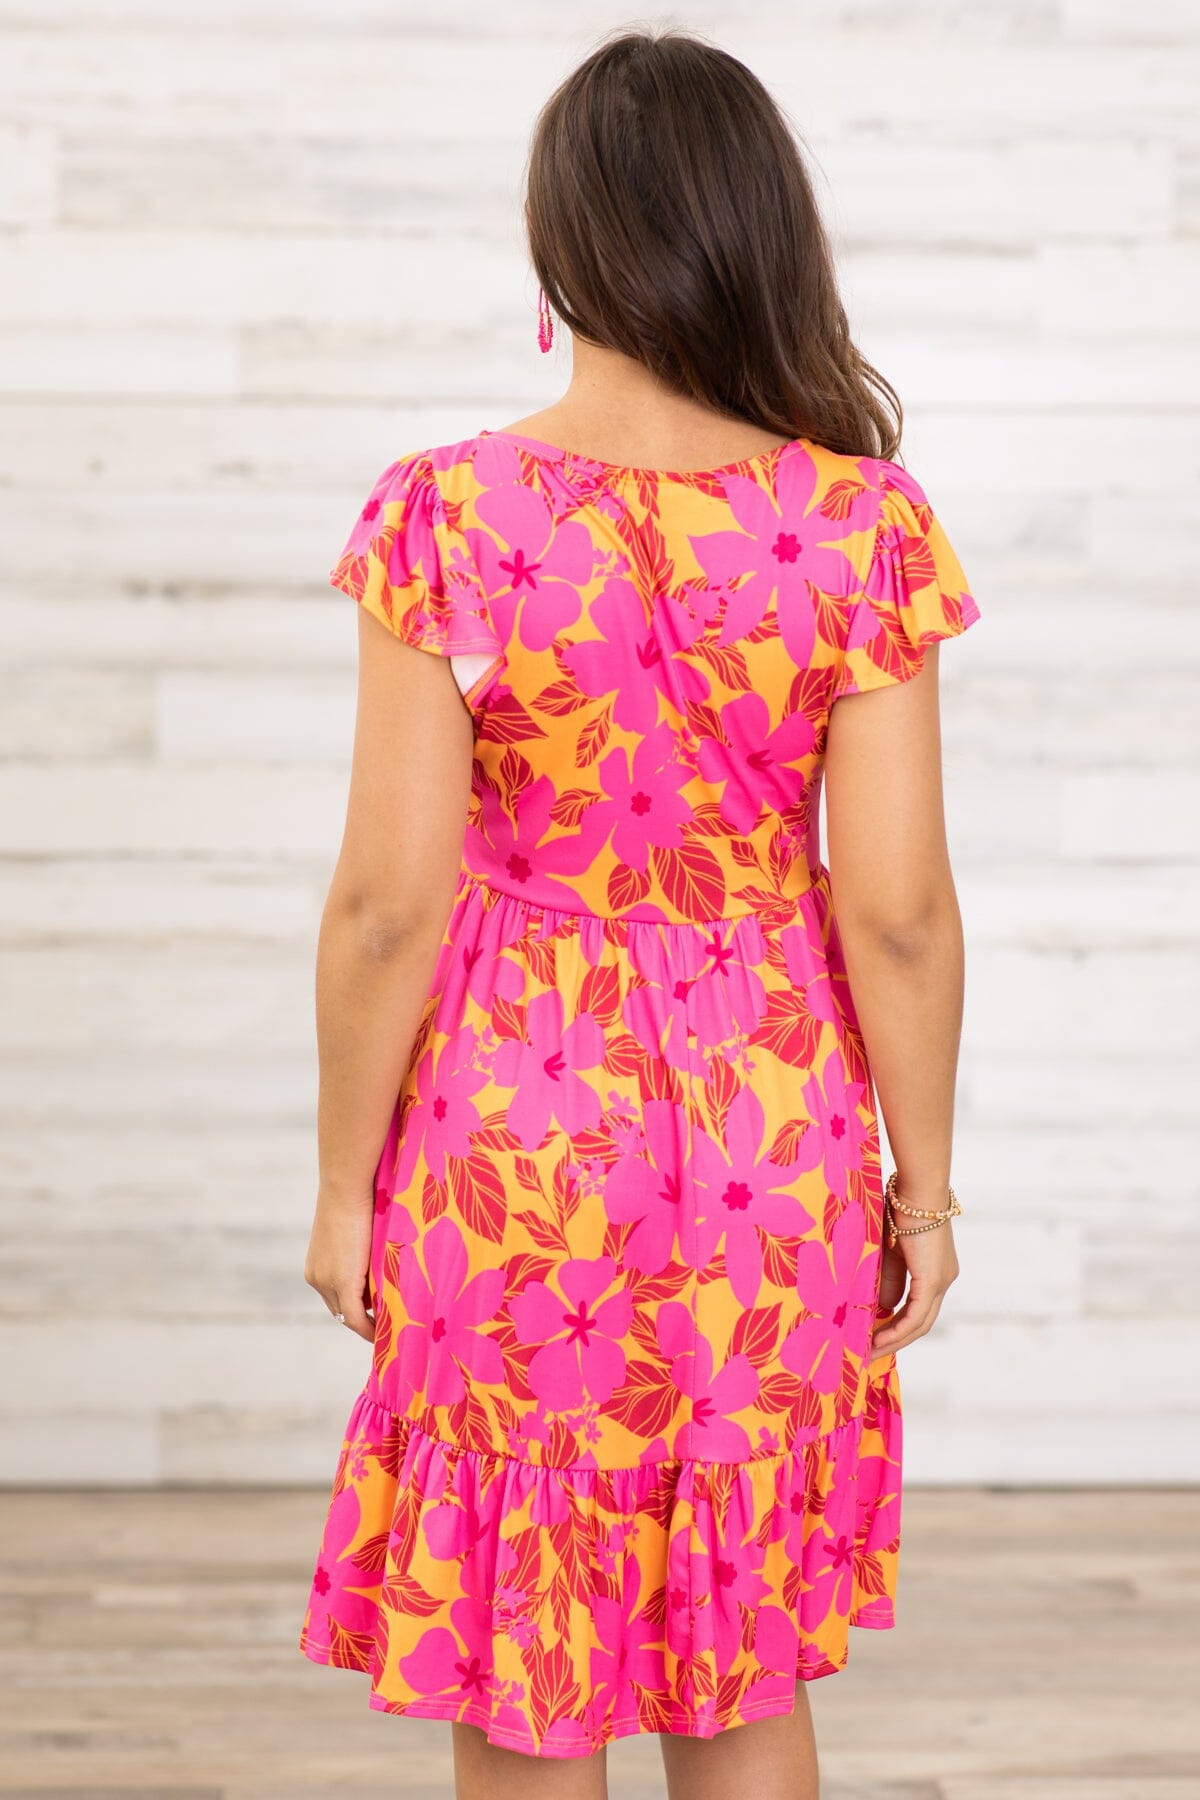 Hot Pink and Orange Floral Print Dress - Filly Flair